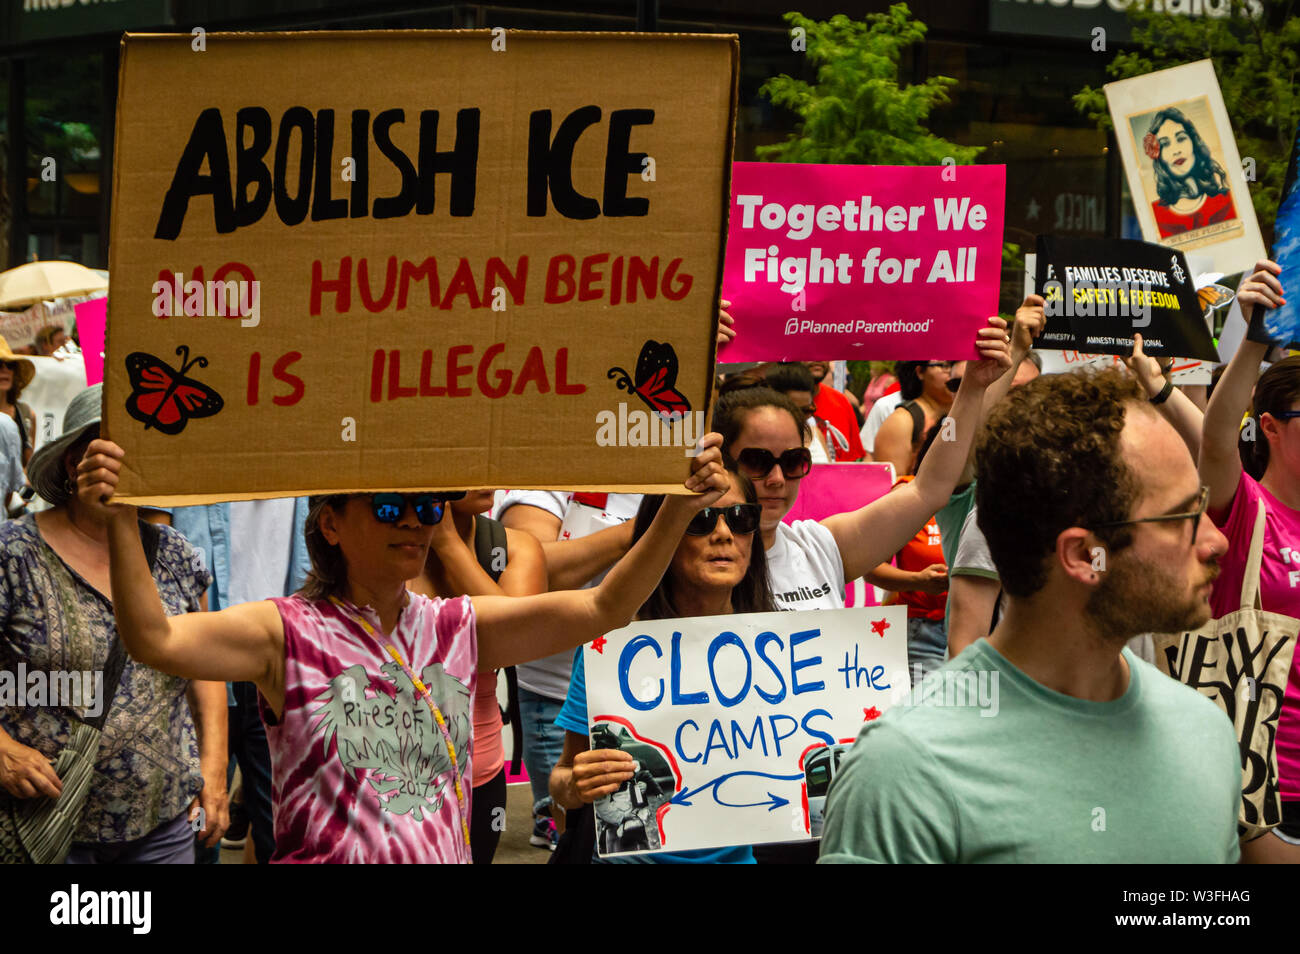 Downtown, Chicago-July 13, 2019: Protest against ICE and Customs and Border Patrol Detention Centers. Sign reads 'Abolish ICE, No Human Being is Illeg Stock Photo